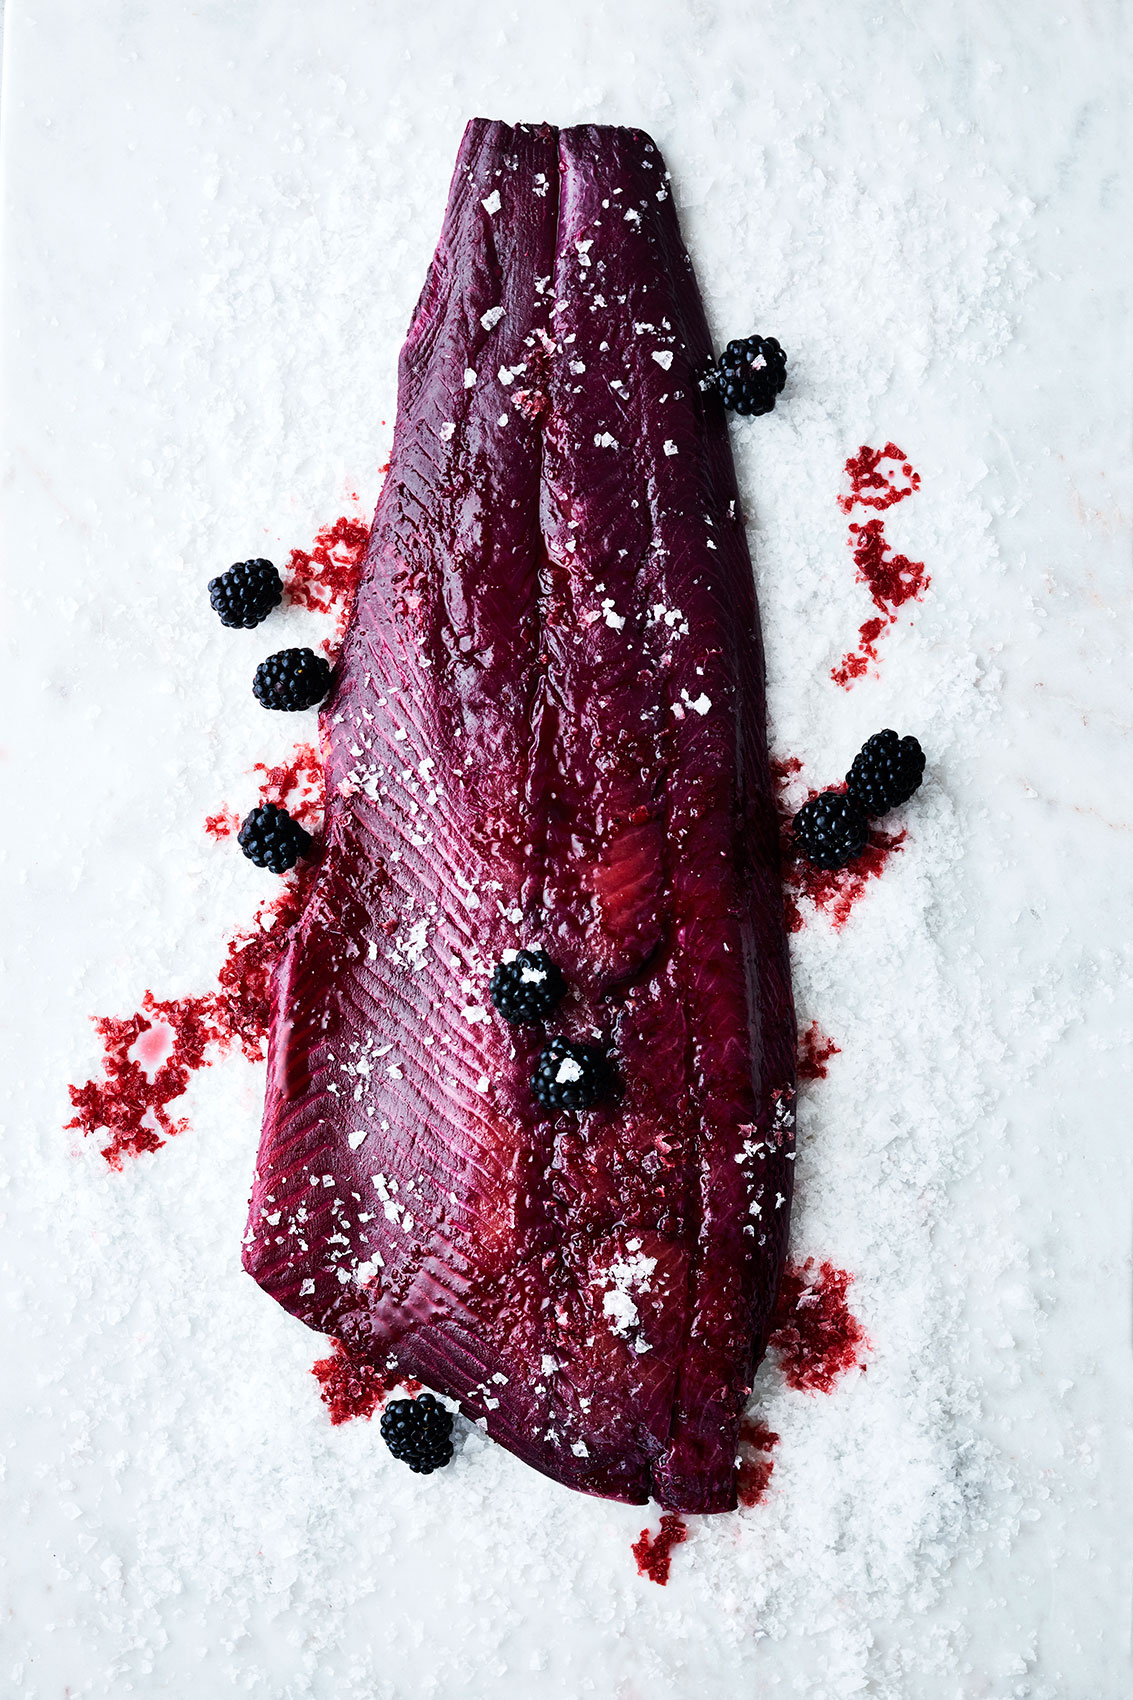 Nord Salt Gravlax with Boysenberries • Advertising & Editorial Food Photography